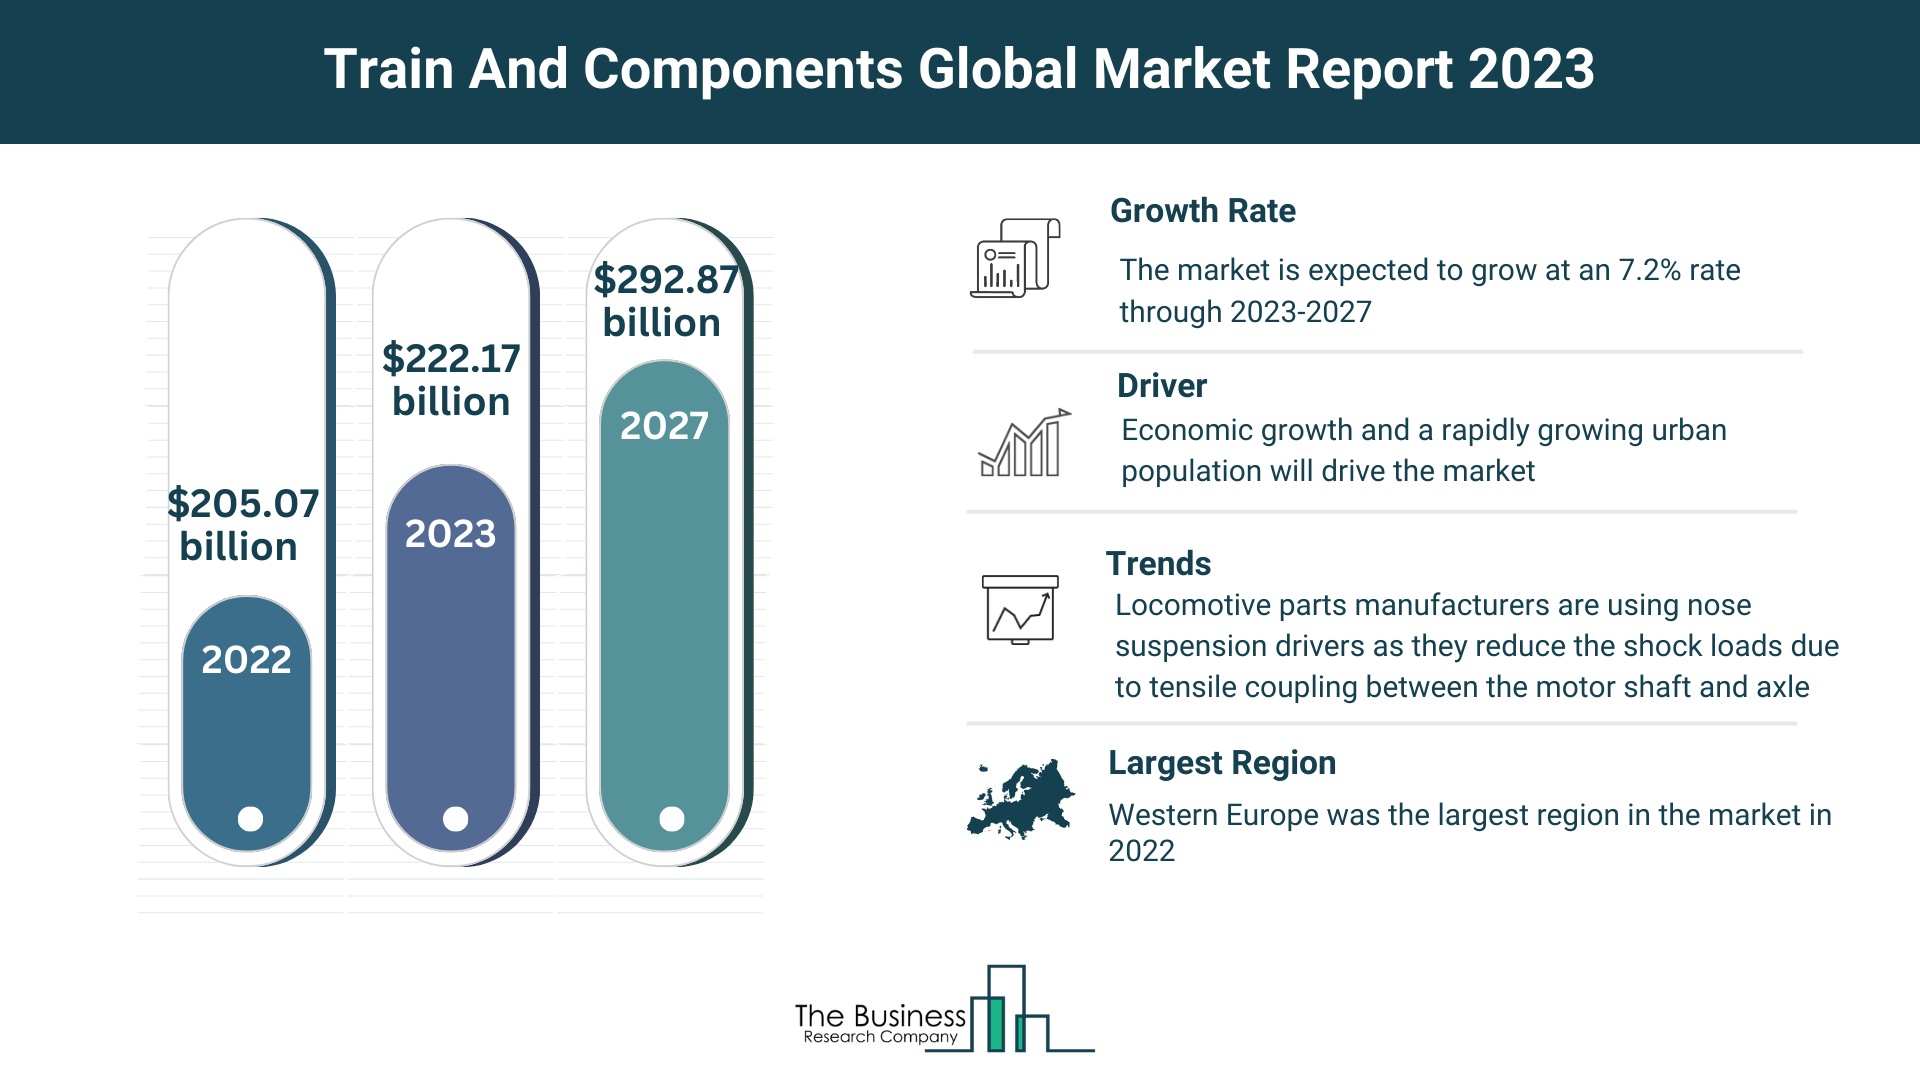 Global Train And Components Market Analysis: Size, Drivers, Trends, Opportunities And Strategies